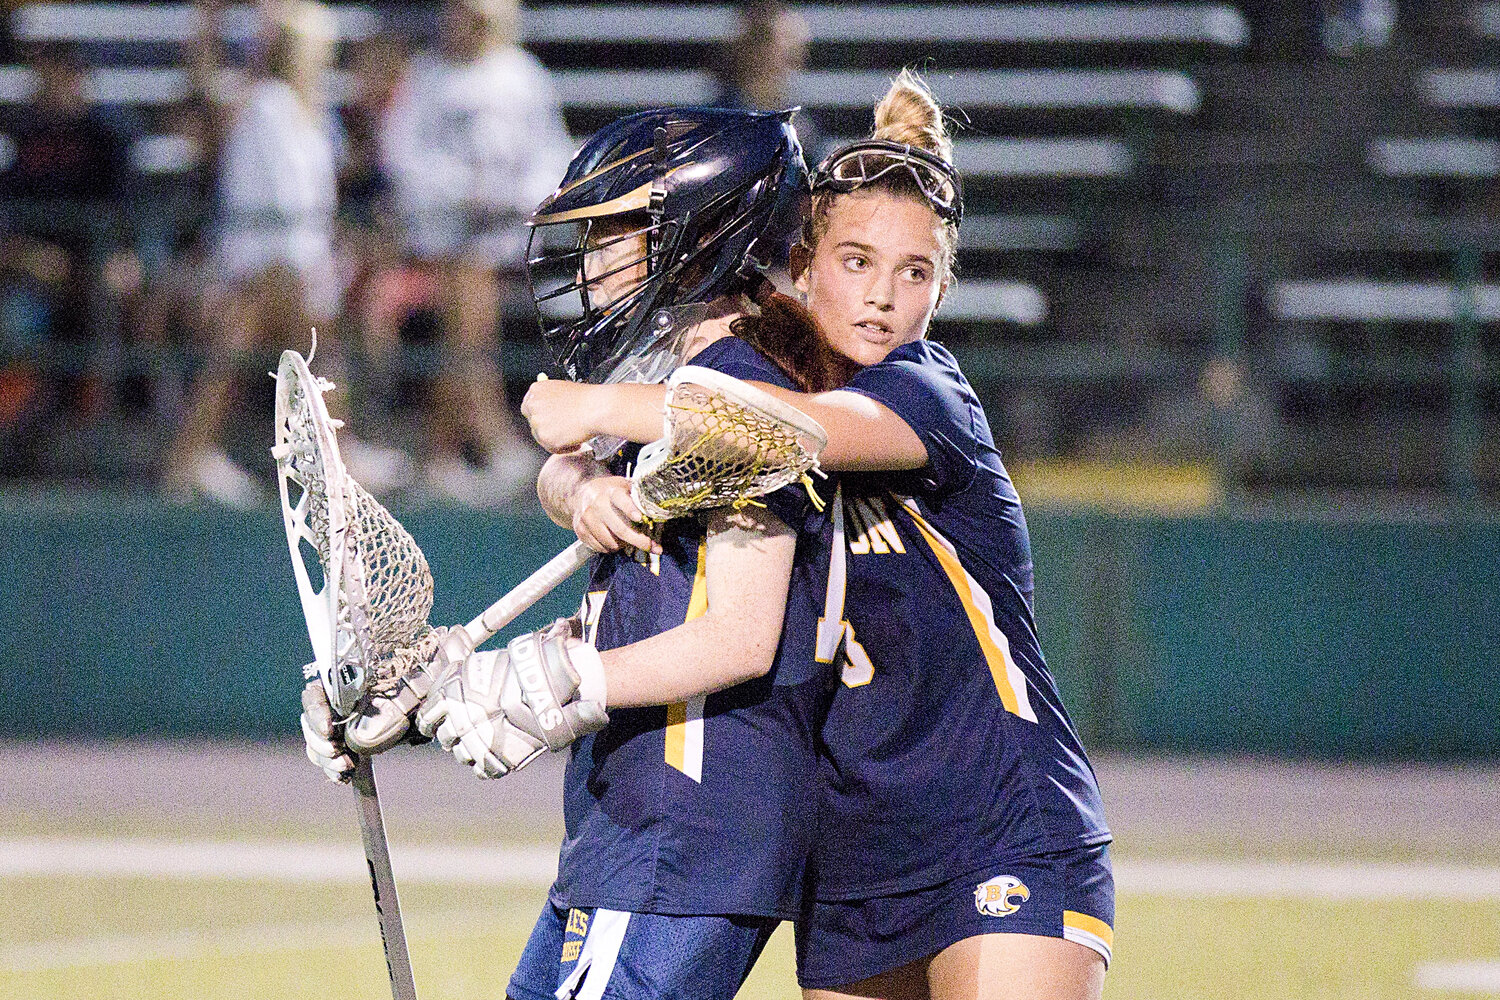 Grace Comfort hugs goalie, Katie McAdams, after the Eagles fall to East Greenwich, 13-11, in the Division I semifinals, Thursday.